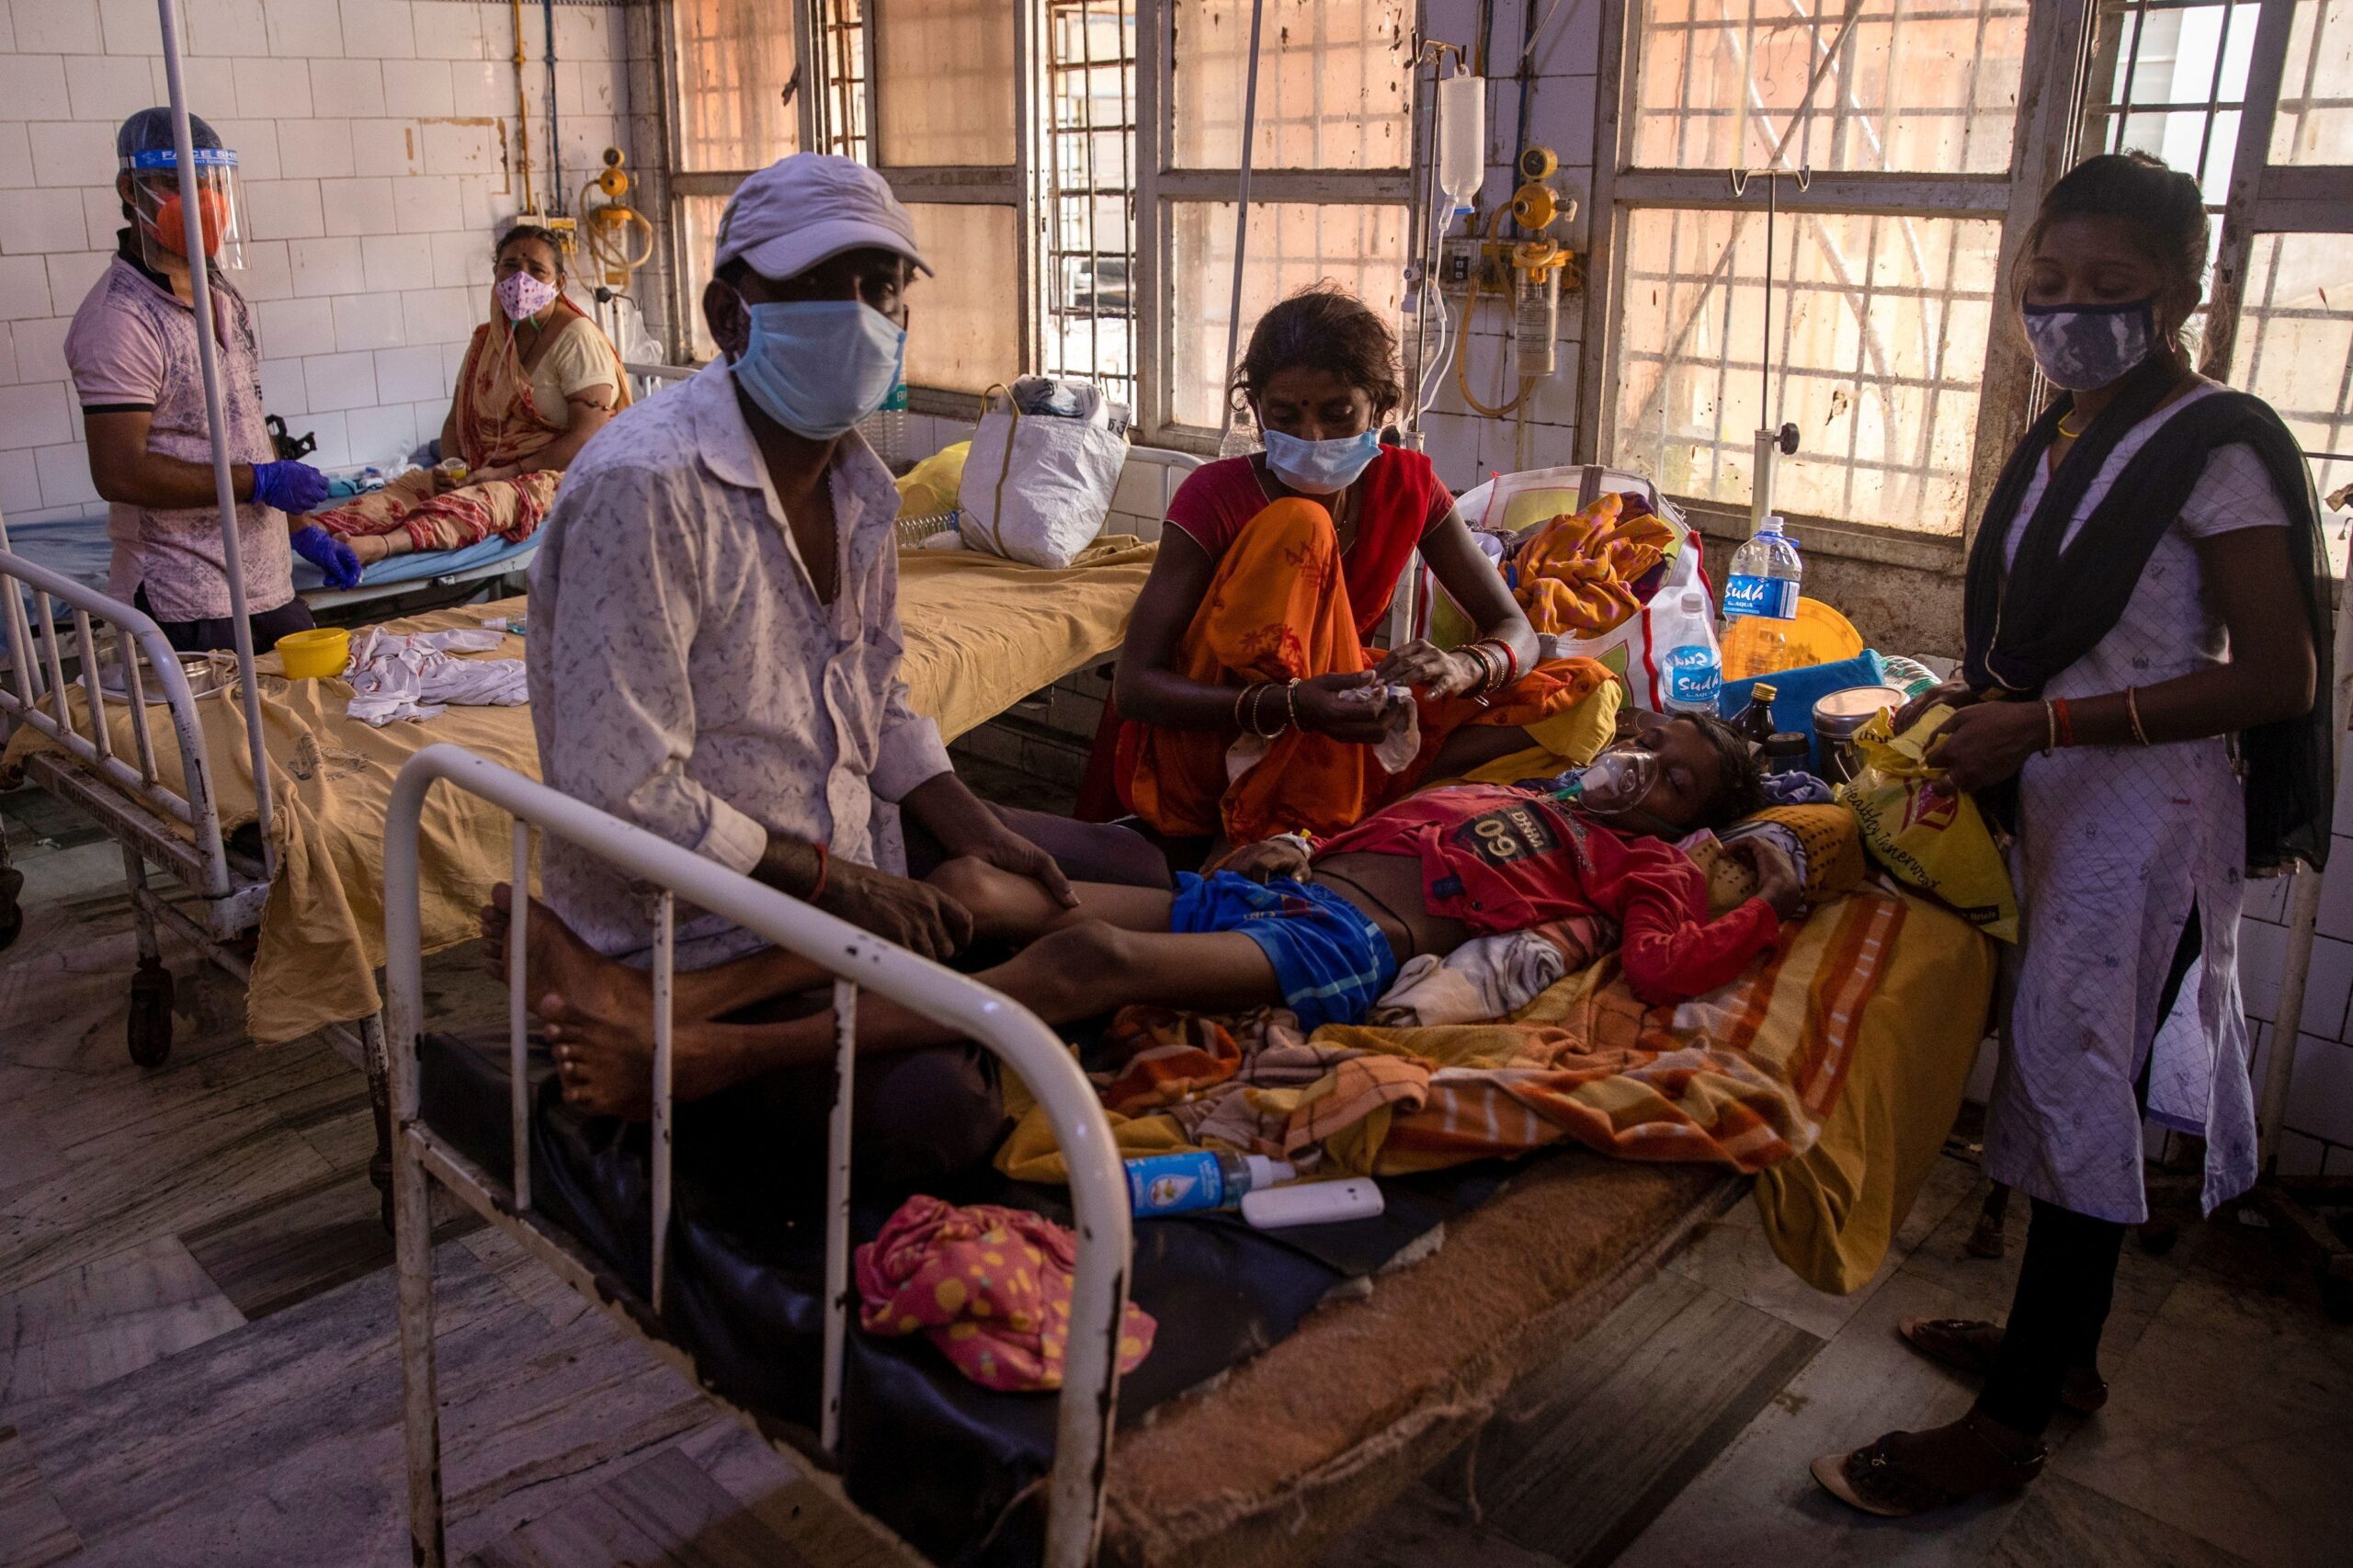 A patient suffering from diabetes lies on a hospital bed as his family look after him on the emergency ward of Jawahar Lal Nehru Medical College and Hospital, during the coronavirus disease (COVID-19) outbreak, in Bhagalpur, Bihar, India, July 26, 2020. REUTERS/Danish Siddiqui